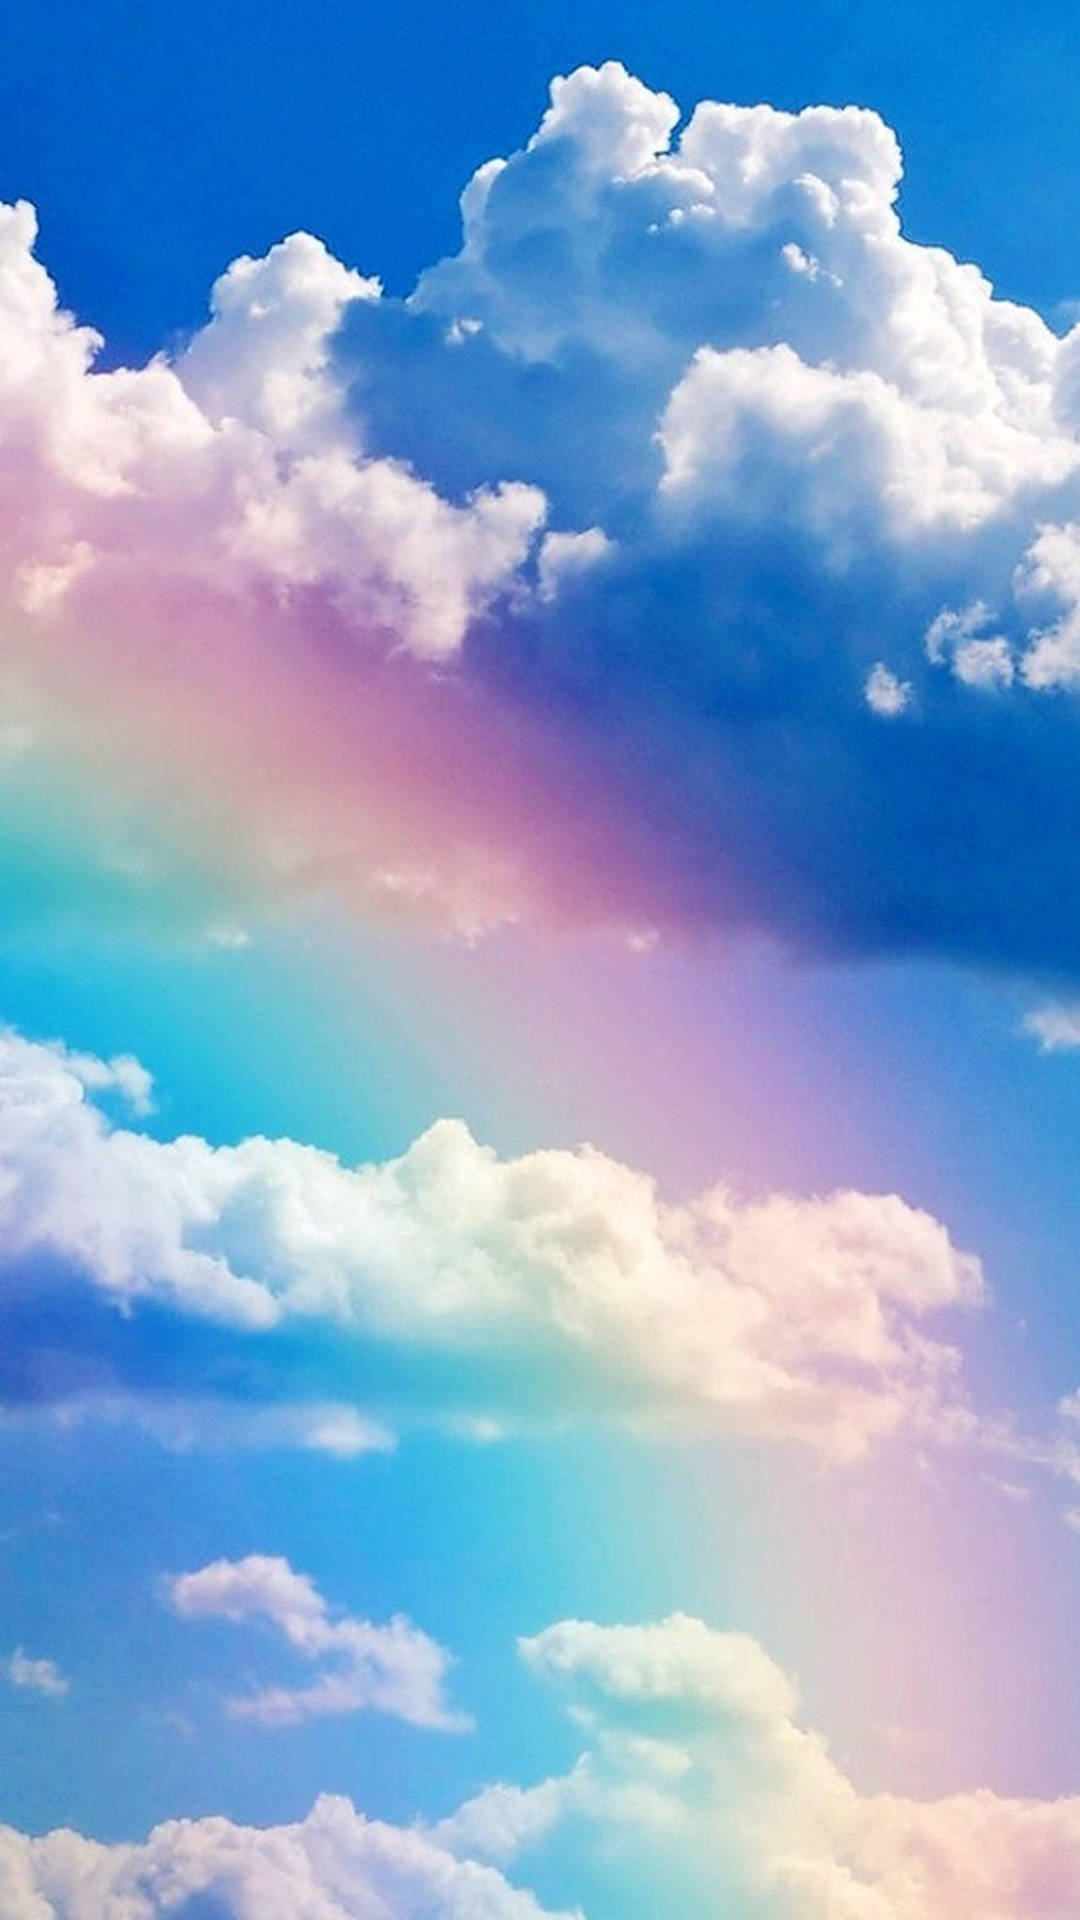 Cloudy Weather With Rainbow Background